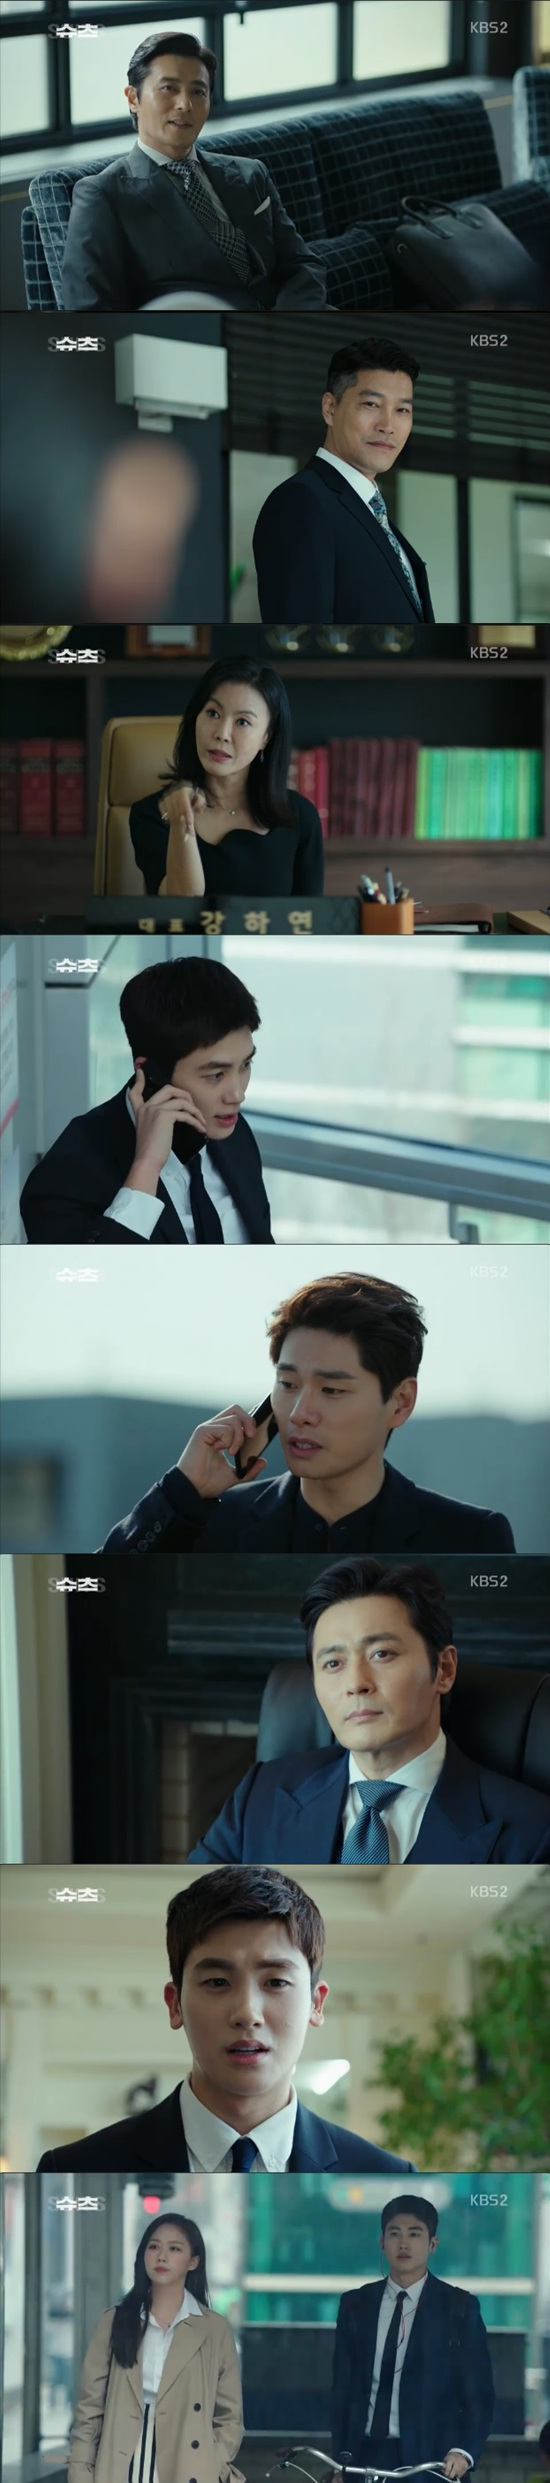 Jang Dong-gun and Park Hyung-sik had a fateful first meeting. In the first KBS 2TV drama Suits broadcast on the 25th, Miniforce Seok and Park Hyung-sik were first met. As he was promoted to the part, he was elected as an attorney.Miniforce went into the room asking Hong Da-ham (Chae Jeong-an) to give a signal when a candidate came out to recognize the statue. Ko Yeon-woo became chased after a match with Park Joon-pyo (Lee Kyung-woo), the second generation chaebol.Park Joon-pyo sent a drug delivery to Ko Yeon-woo and reported it to the police. Ko Yeon-woo ran away and entered the interview room to select a new lawyer for Kang & Ham.Hong Da-ham asked about the statue, thinking that Ko Yeon-woo was a new lawyer. Ko Yeon-woo immediately answered.The redness was startled and signaled to the Miniforce seat, which seemed to be liked by Ko Yeon-woo, but Drug came out of the bag with Ko Yeon-woo.Ko told the Miniforce that he was trapped. Then the police came in. Miniforce wanted to test him.Ko Yeon-woo mentioned the polices rules of duty at the end of the Miniforce seat to argue, and picked up what the police did not notify.Ko Yeon-woo passed the crisis thanks to Miniforces hiding Drug in a bag under a table while he was talking to police.Miniforce chose to hire him as an Asso lawyer, even though he had no judicial notice pass, a law school diploma, or a lawyers license.After handling the drug bag, Ko Yeon-woo prepared to go to Kang & Ham. After his first commute, Ko Yeon-woo waited for the Miniforce seat.Youre fired, said Ko Yeon-woo on the dismissal notice / Photo = KBS broadcast screen